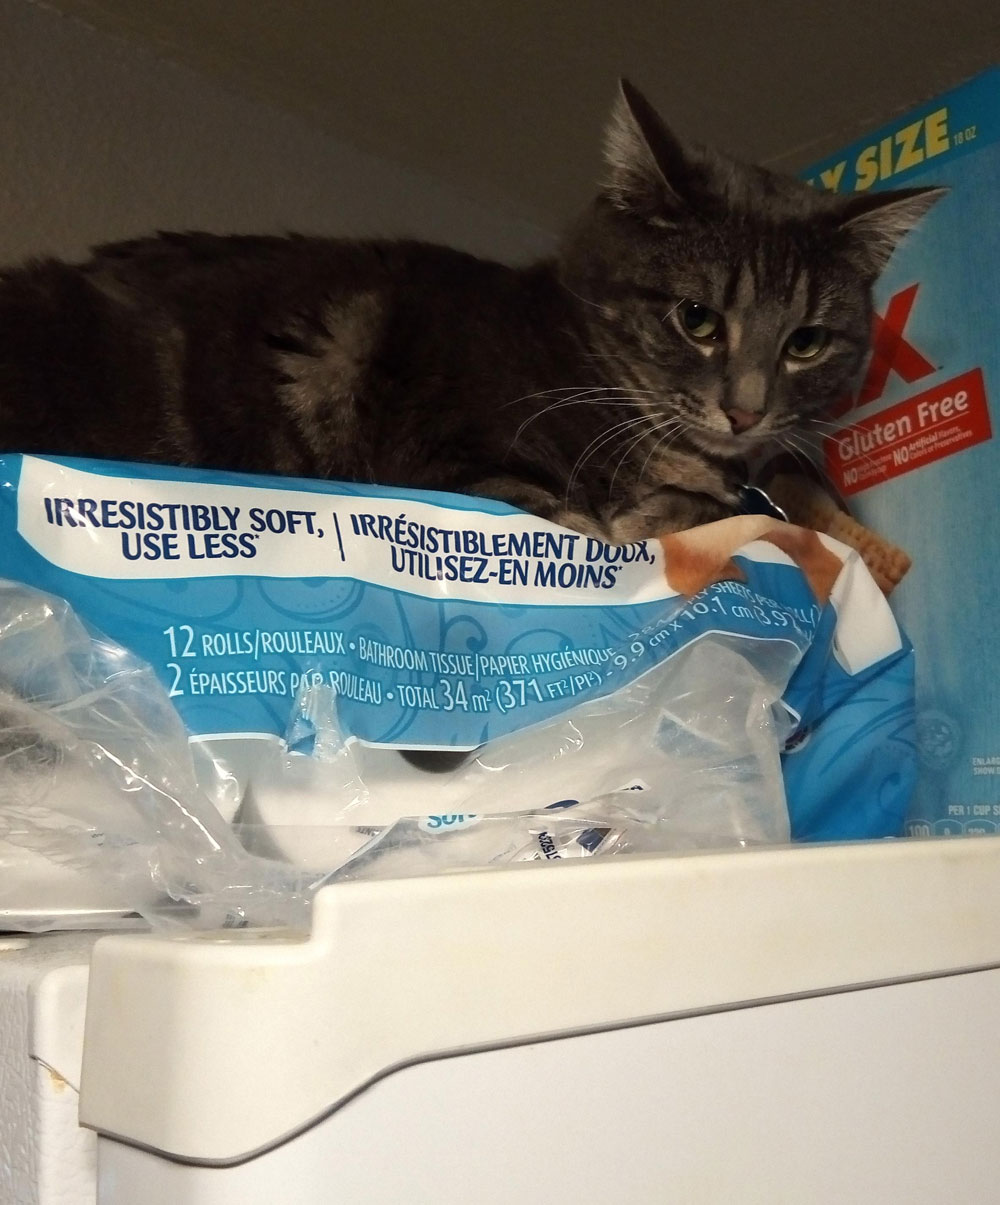 This package of toilet paper my cat likes to lay on describes her